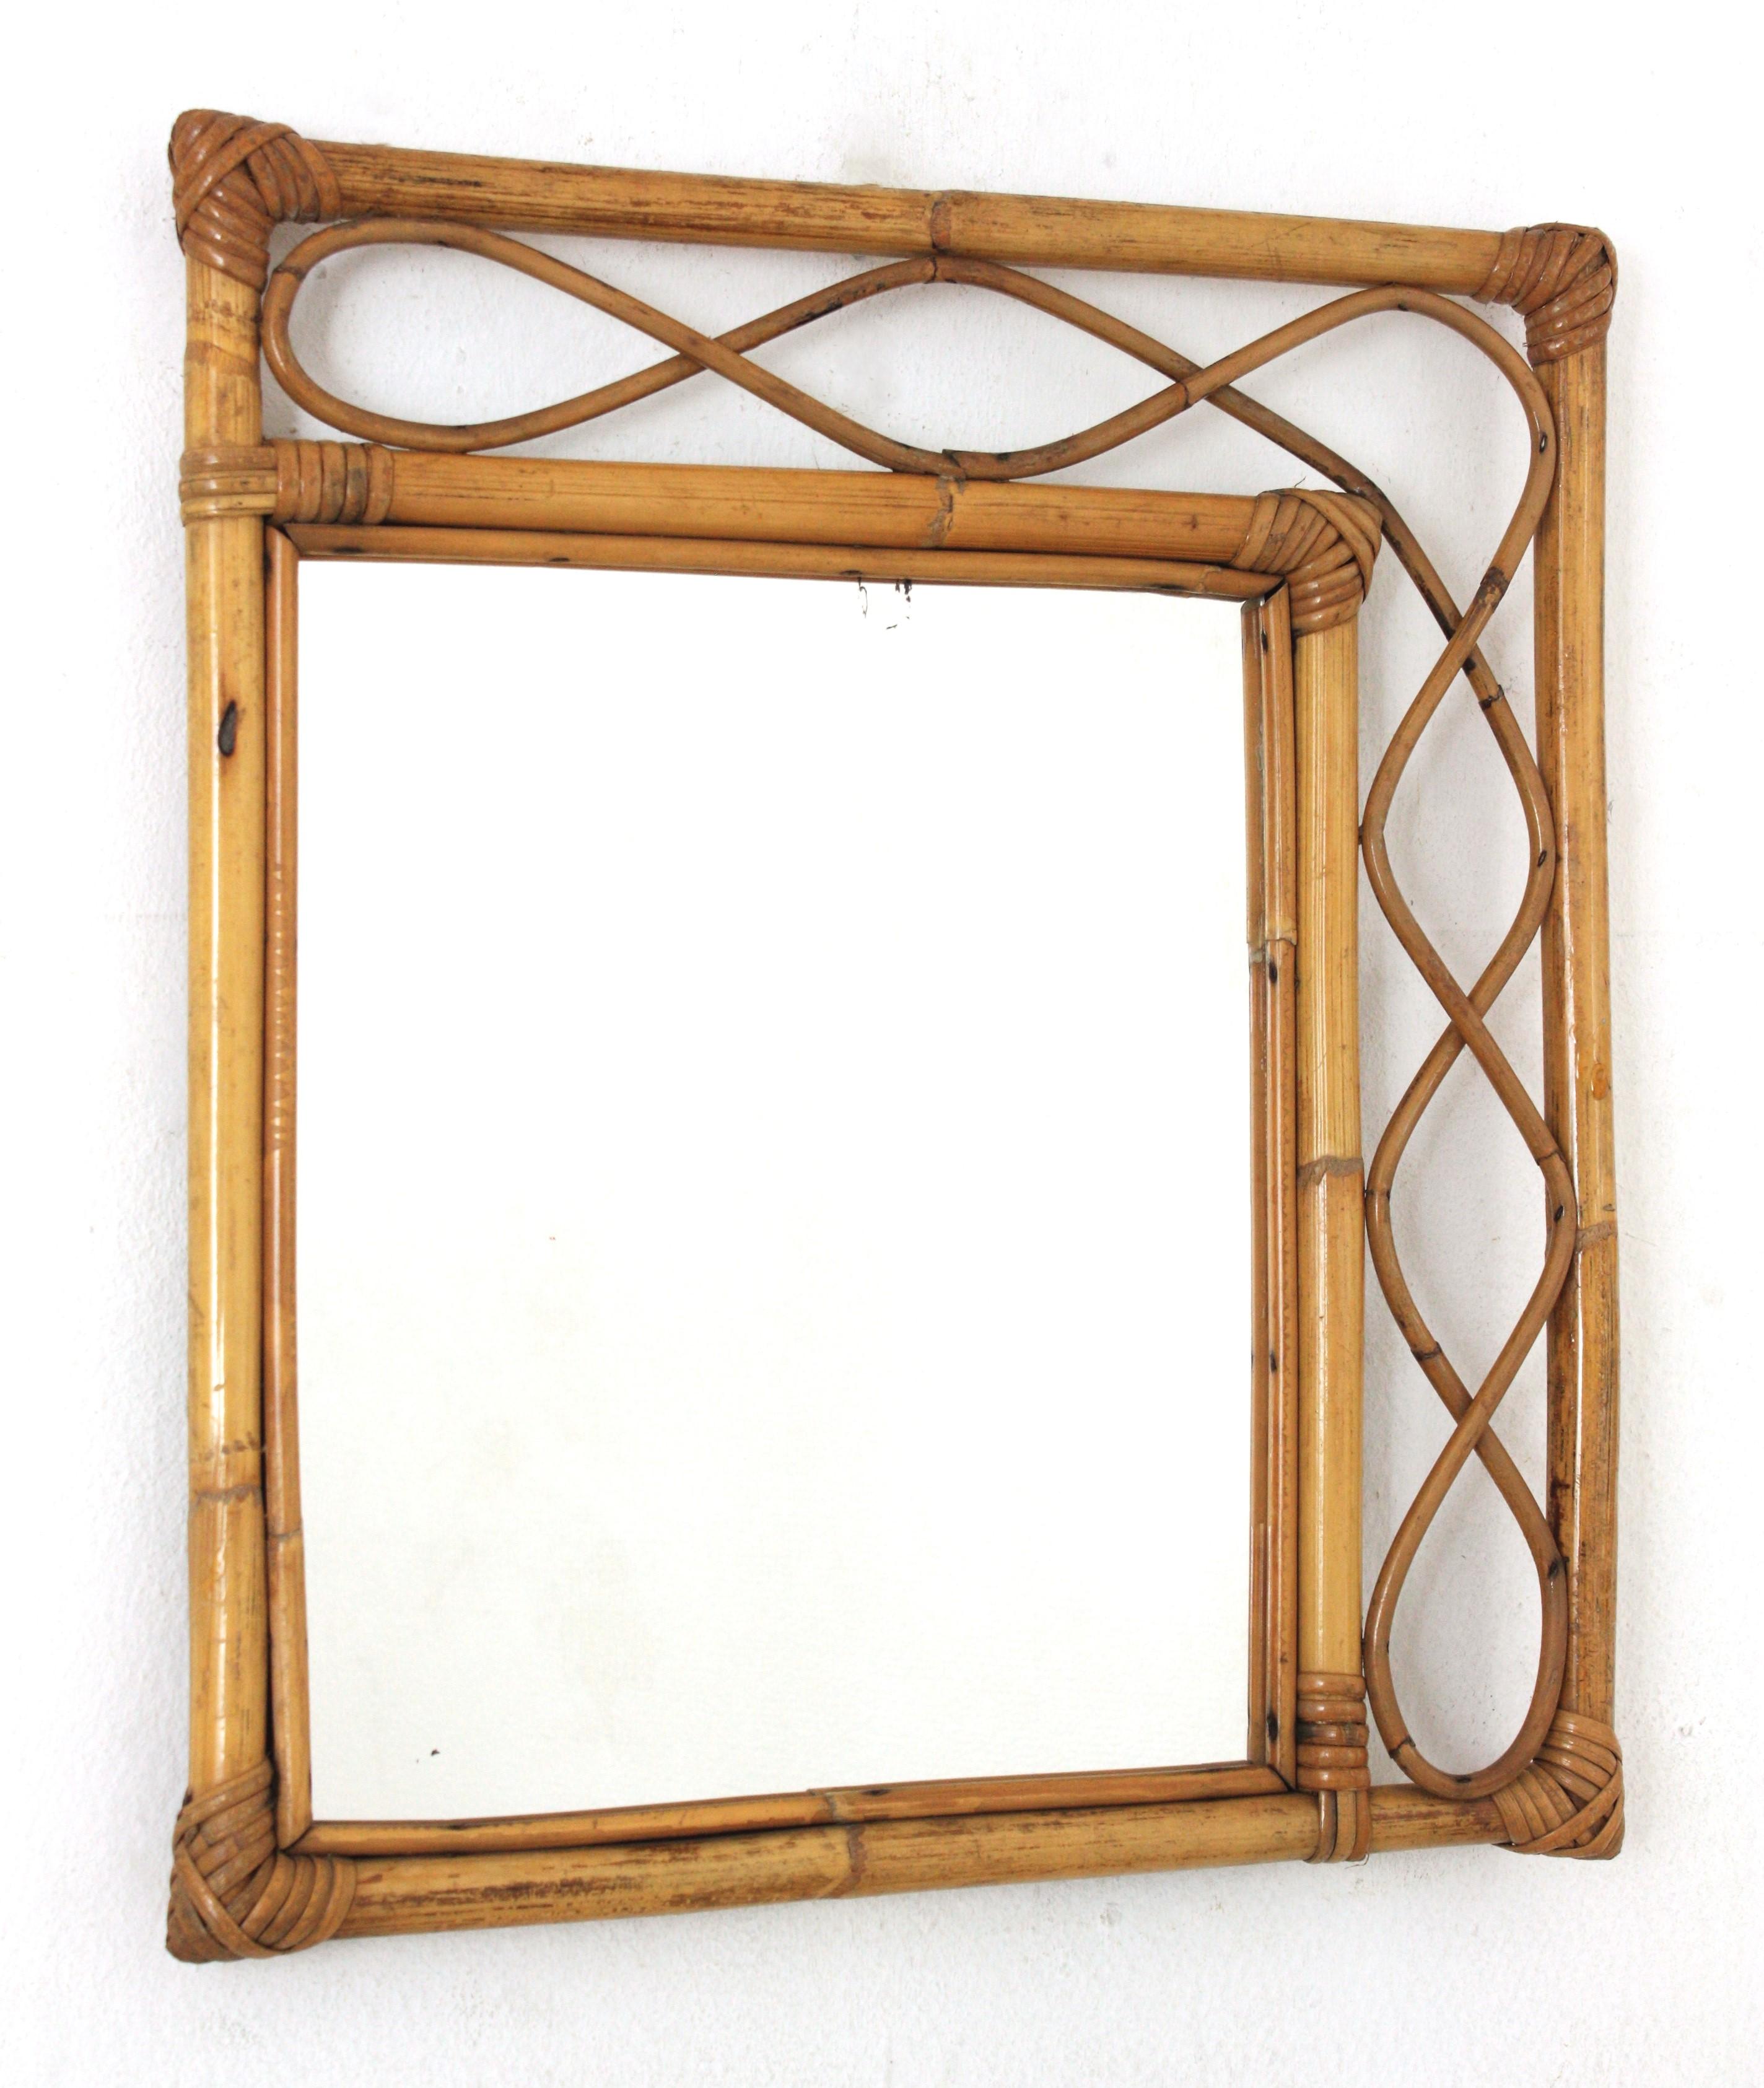 Eye-catching Mid-Century Modern Franco Albini style handcrafted bamboo and rattan mirror. Italy, 1960s.
This mirror features a double bamboo rectangular frame with decorative rattan undulations between the bamboo canes.
It will be a nice addition